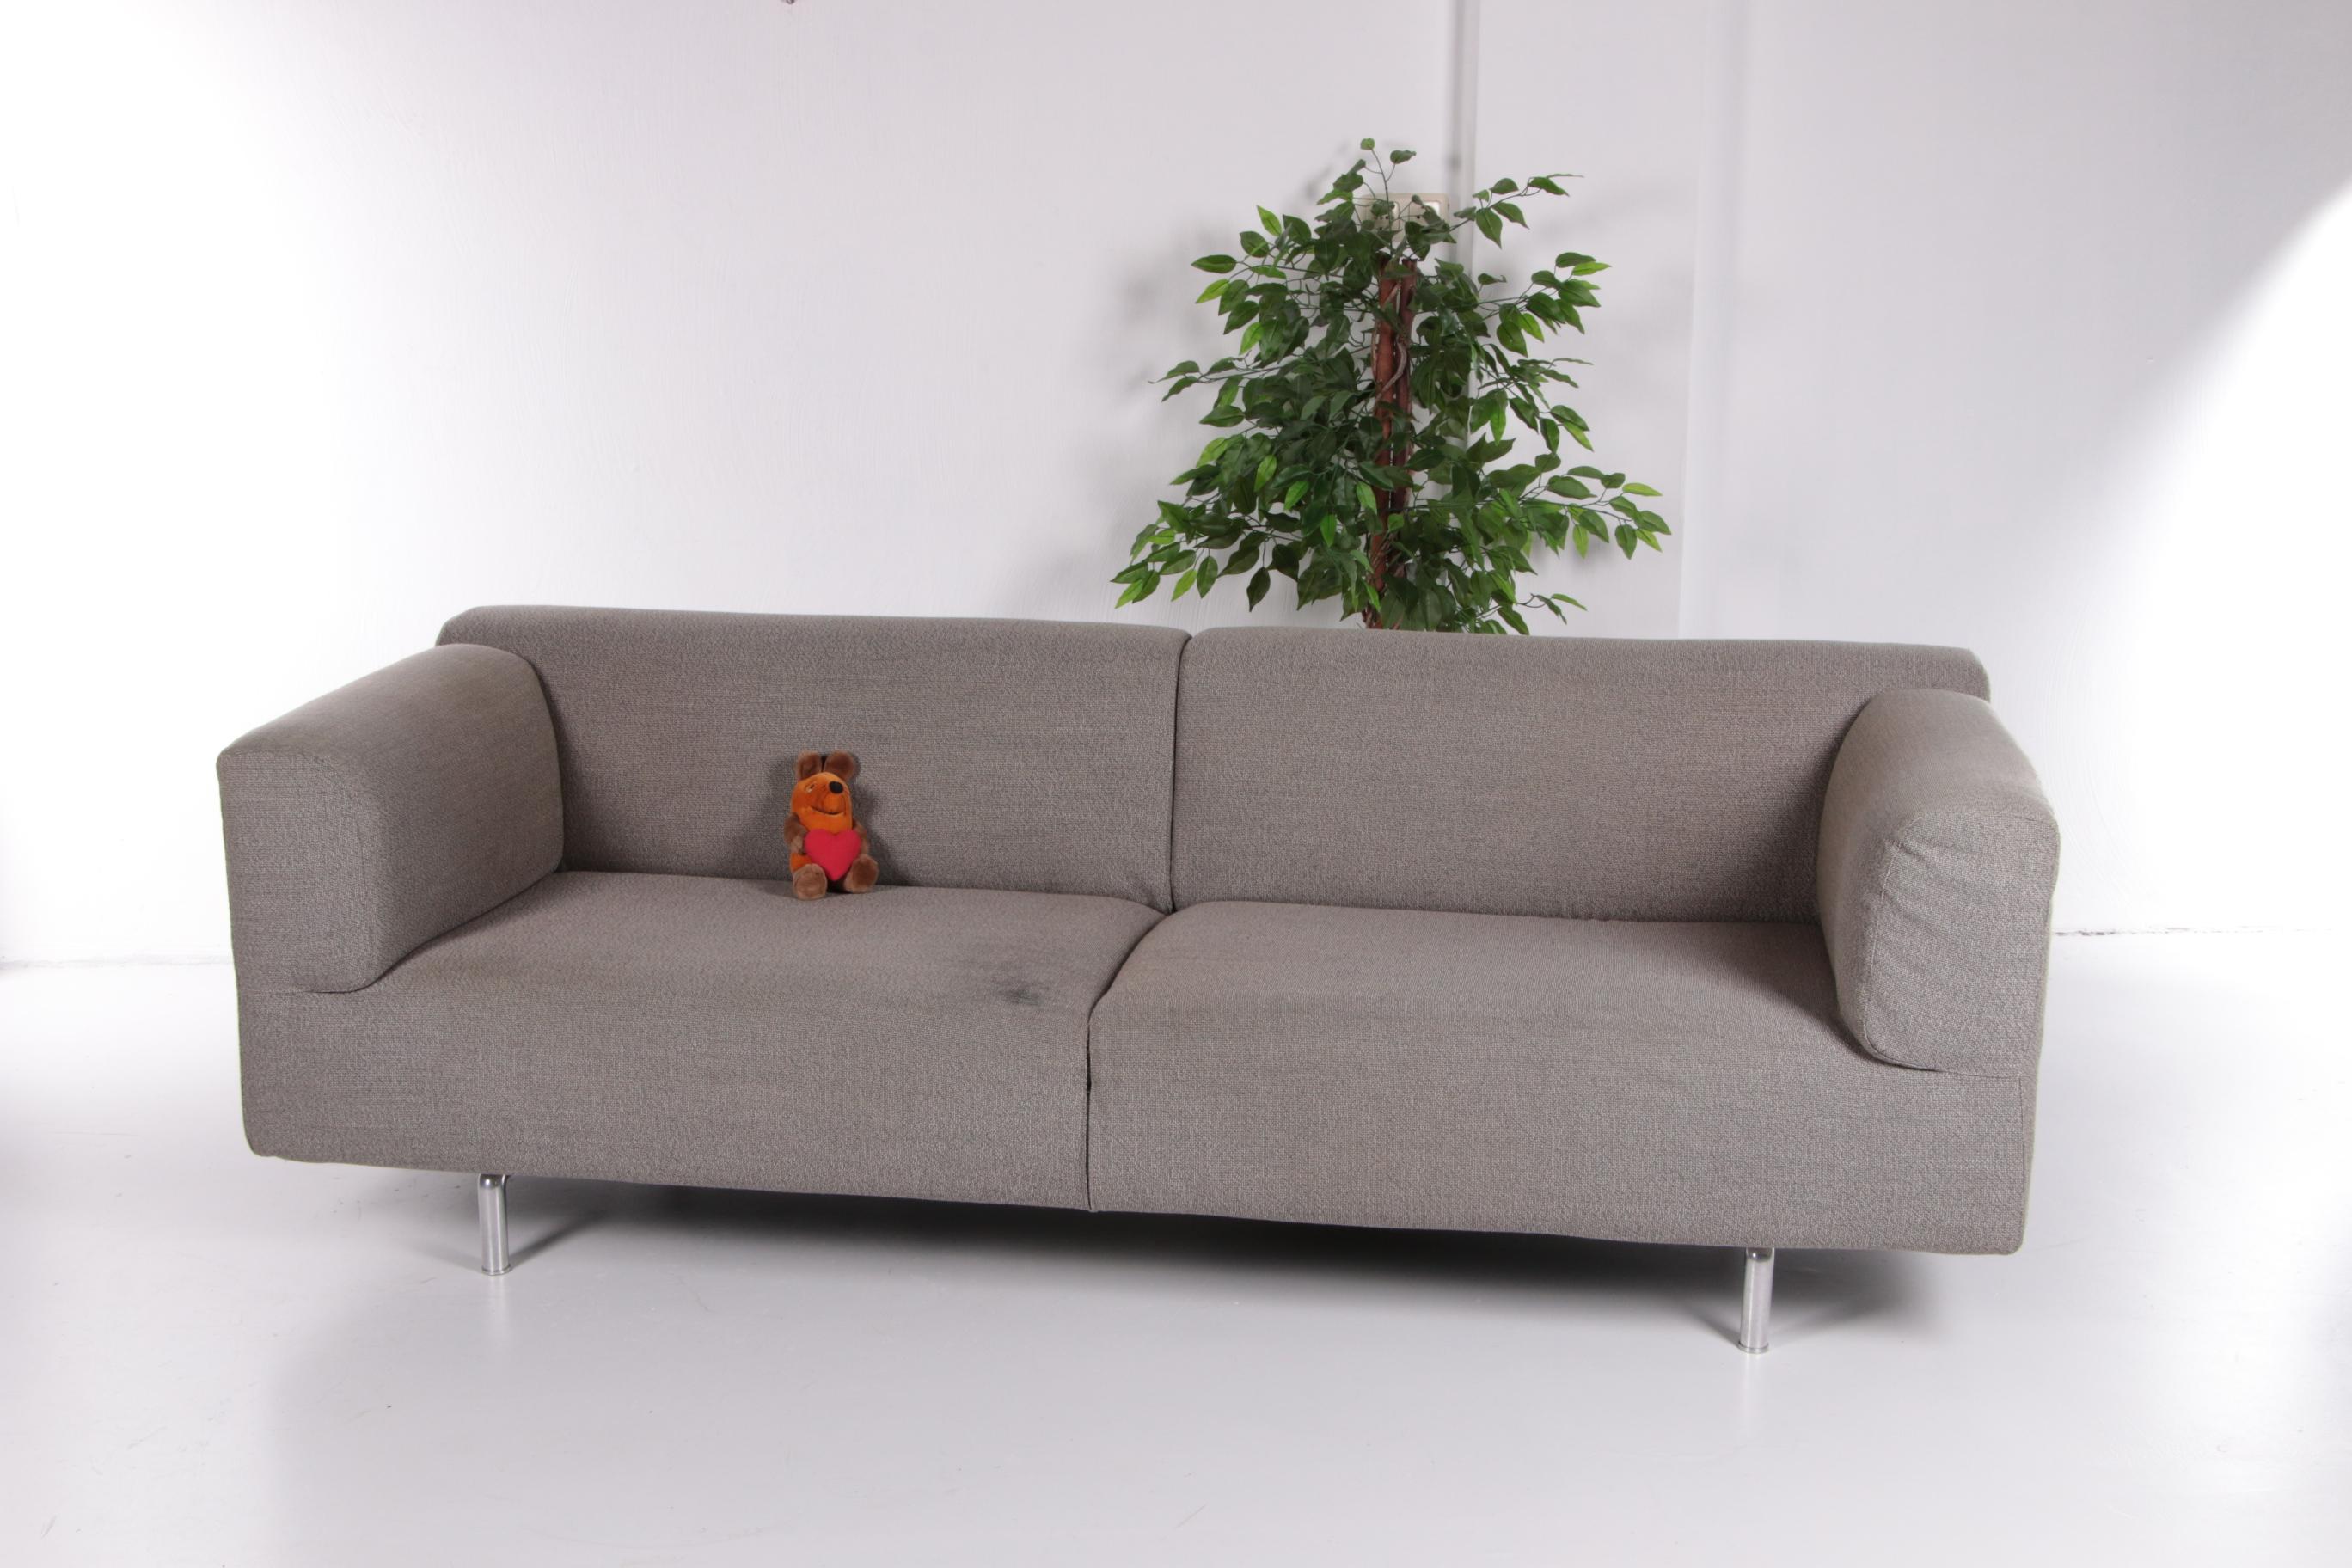 Cassina Bank Model 250 gray melange, design by Piero Lissoni.


This sofa is of the 250 series made in the 1980s.

The design is by a leading Italian architect, art director and designer Piero Lissoni (1956) in collaboration with Sook Kim. In